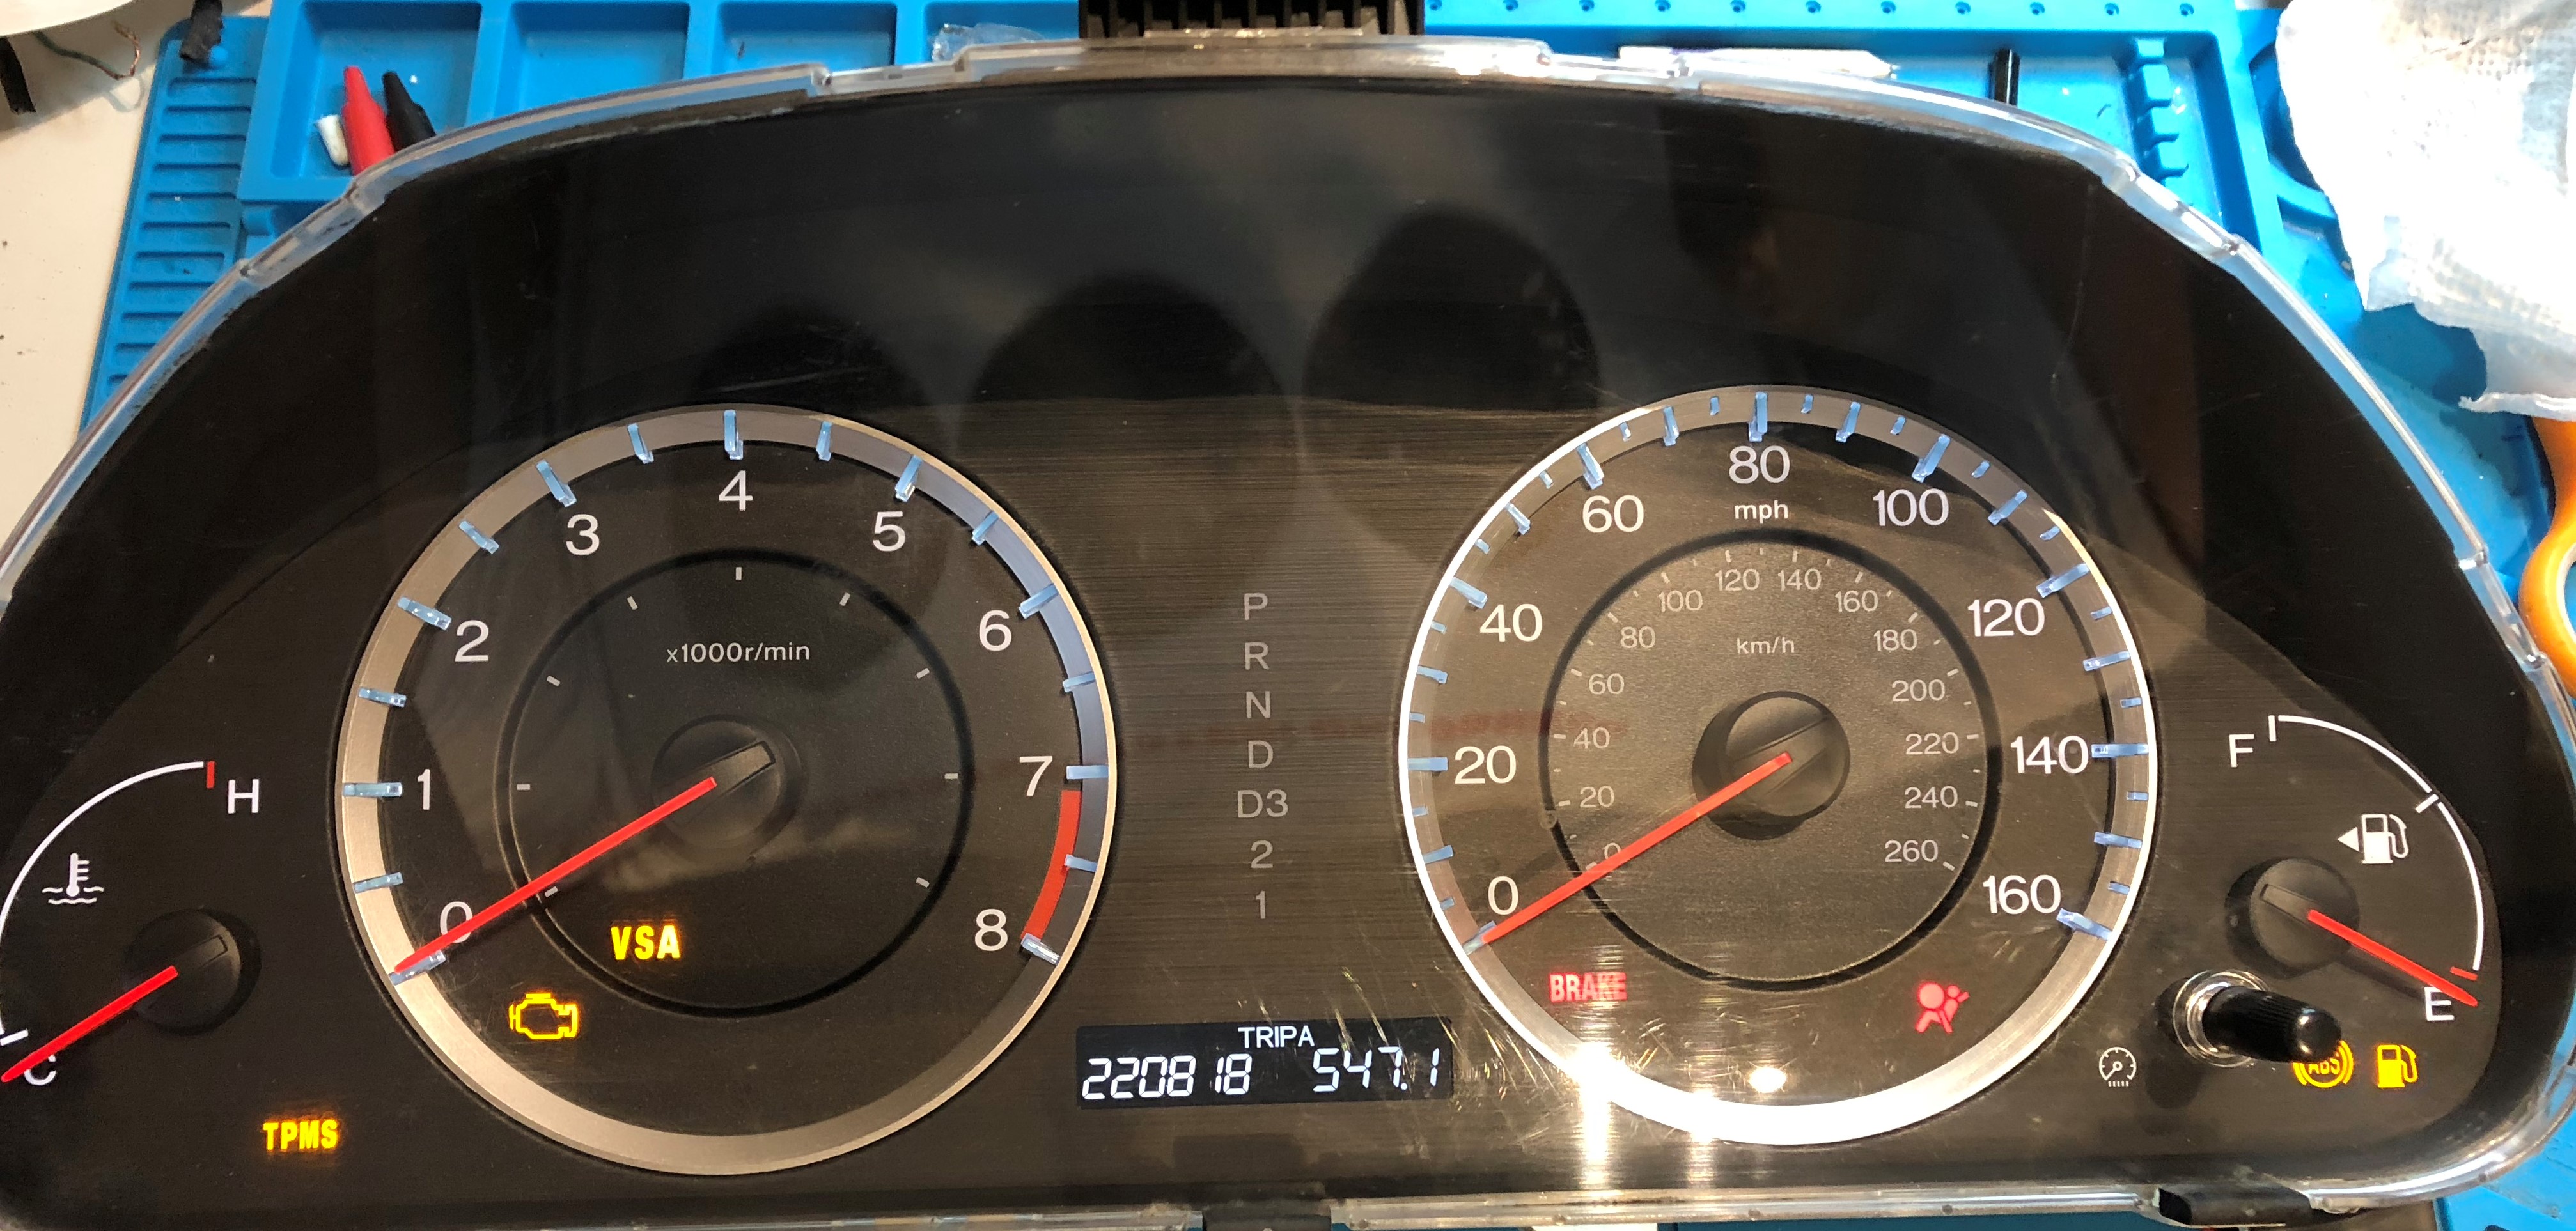 2008 HONDA ACCORD USED DASHBOARD INSTRUMENT CLUSTER FOR SALE (MPH) - DASHBOARD  INSTRUMENT CLUSTER